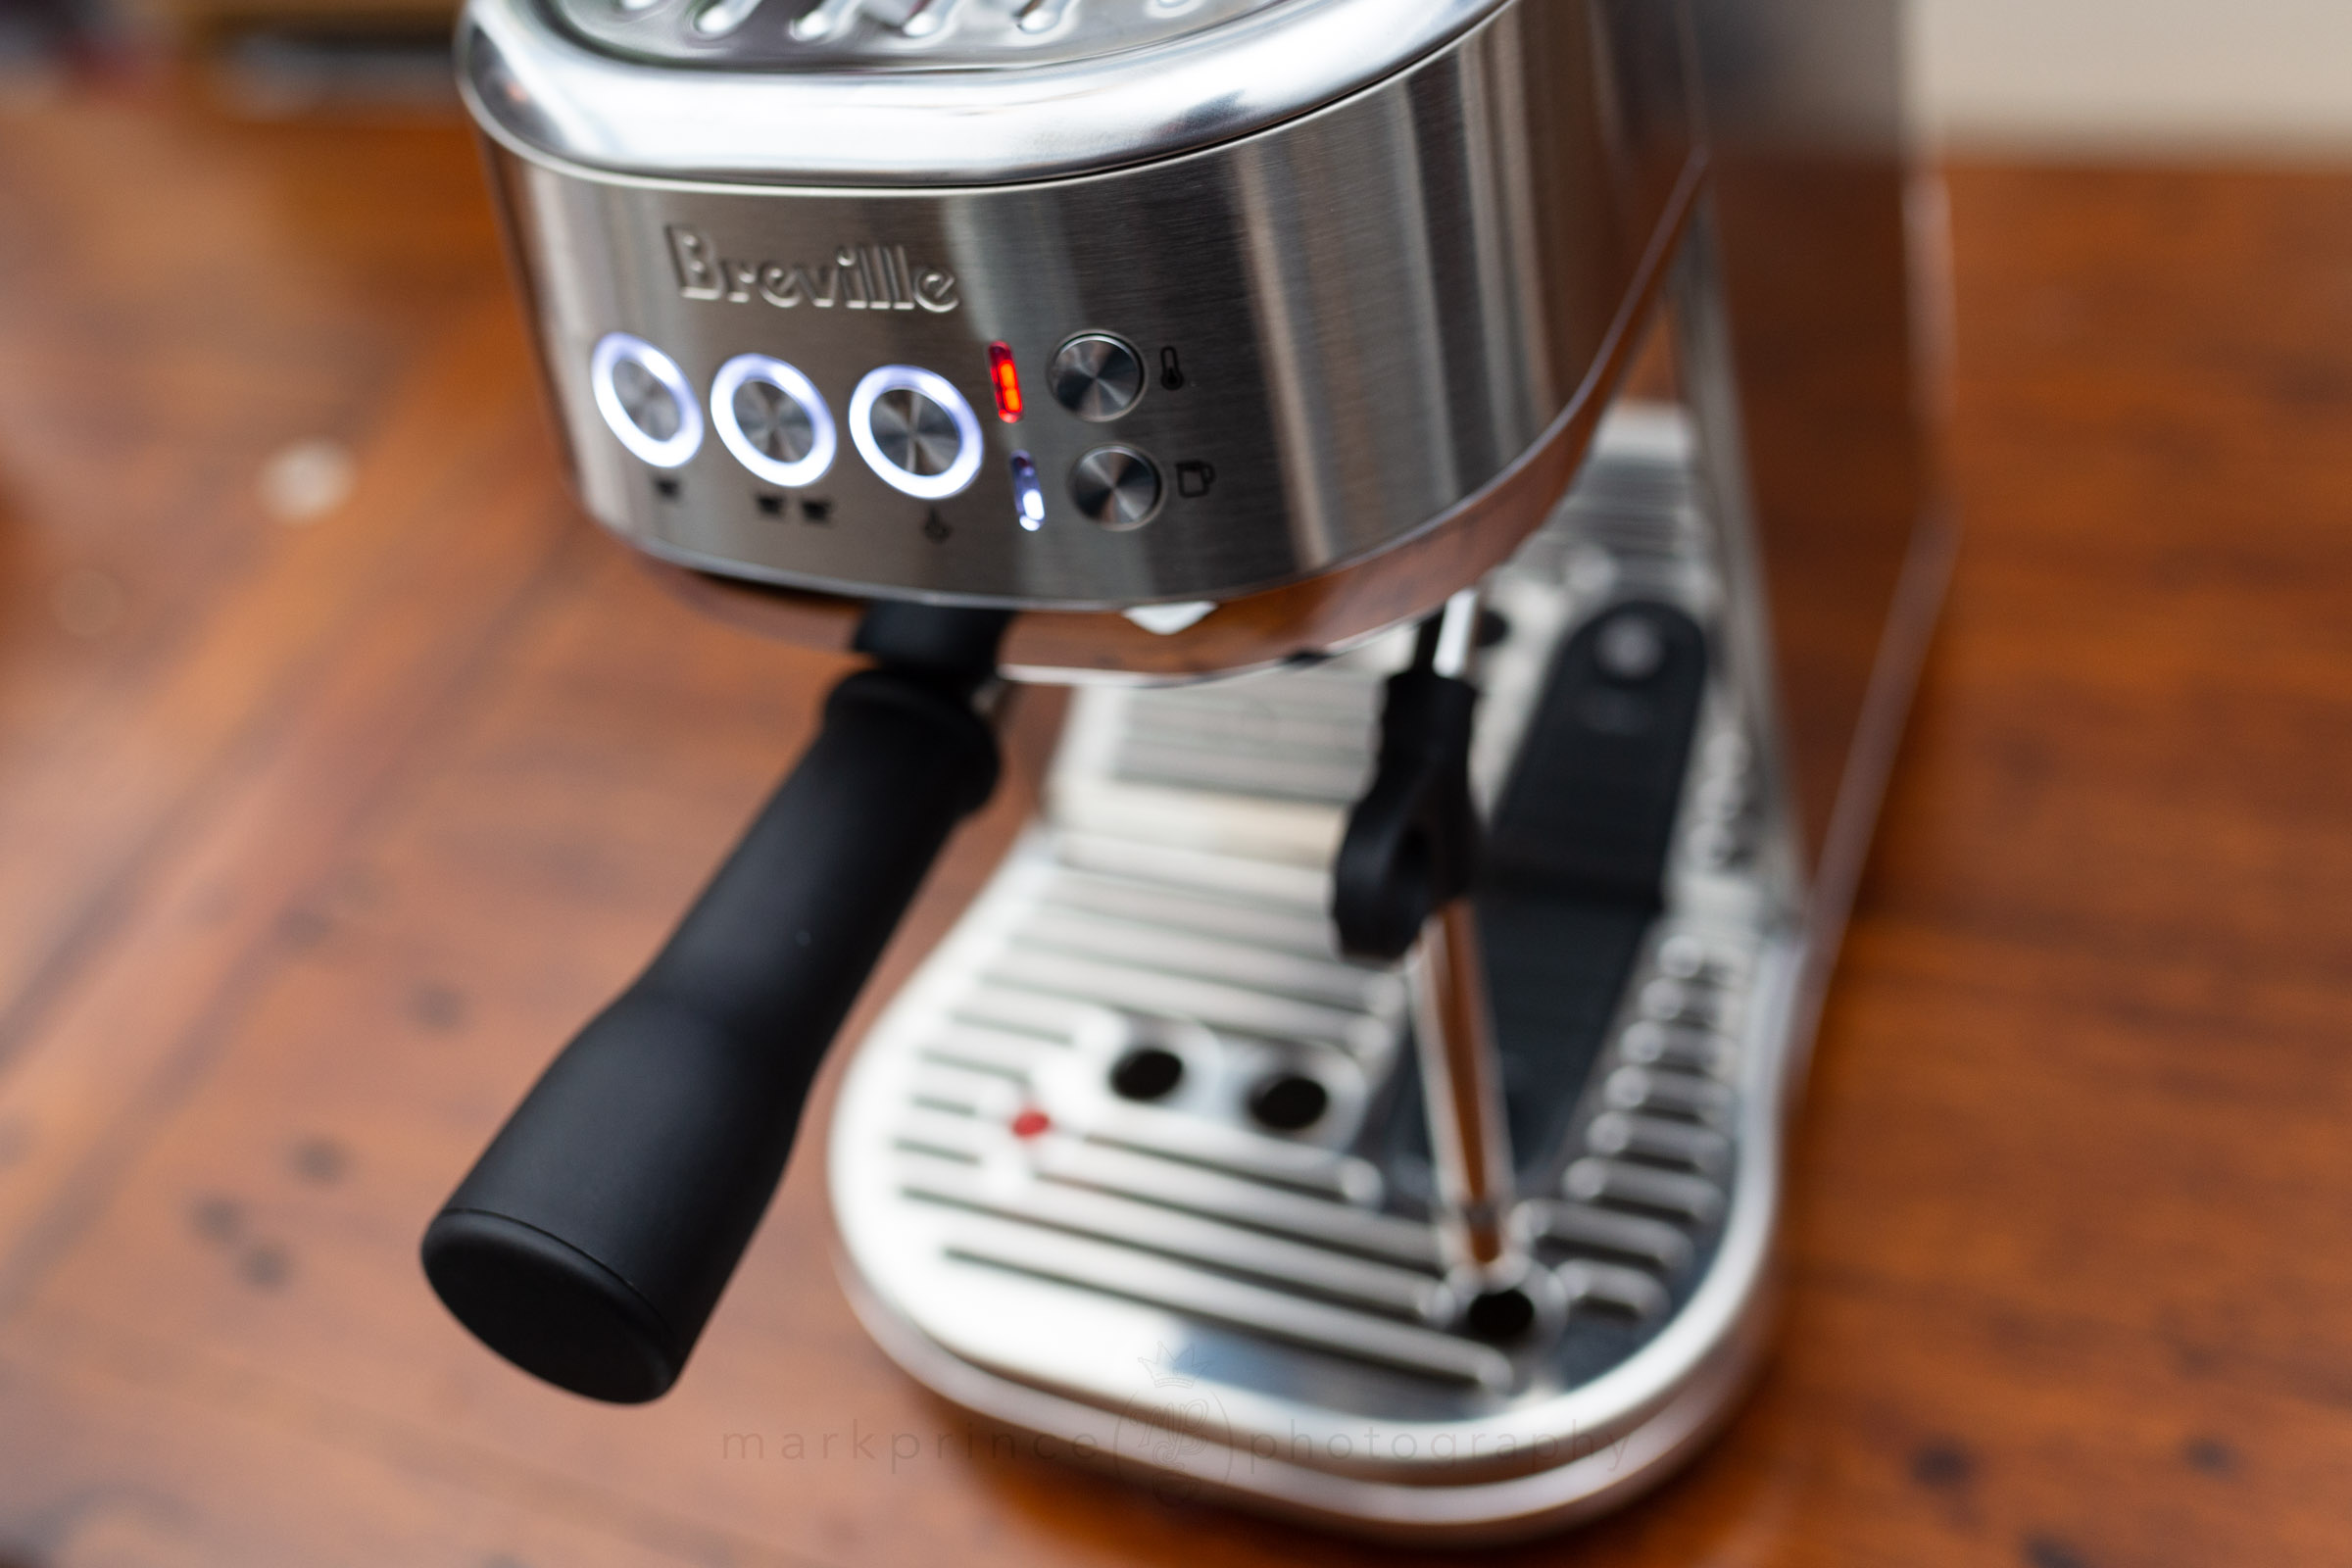 Breville. the Bambino Plus Espresso Machine - Stainless Steel at